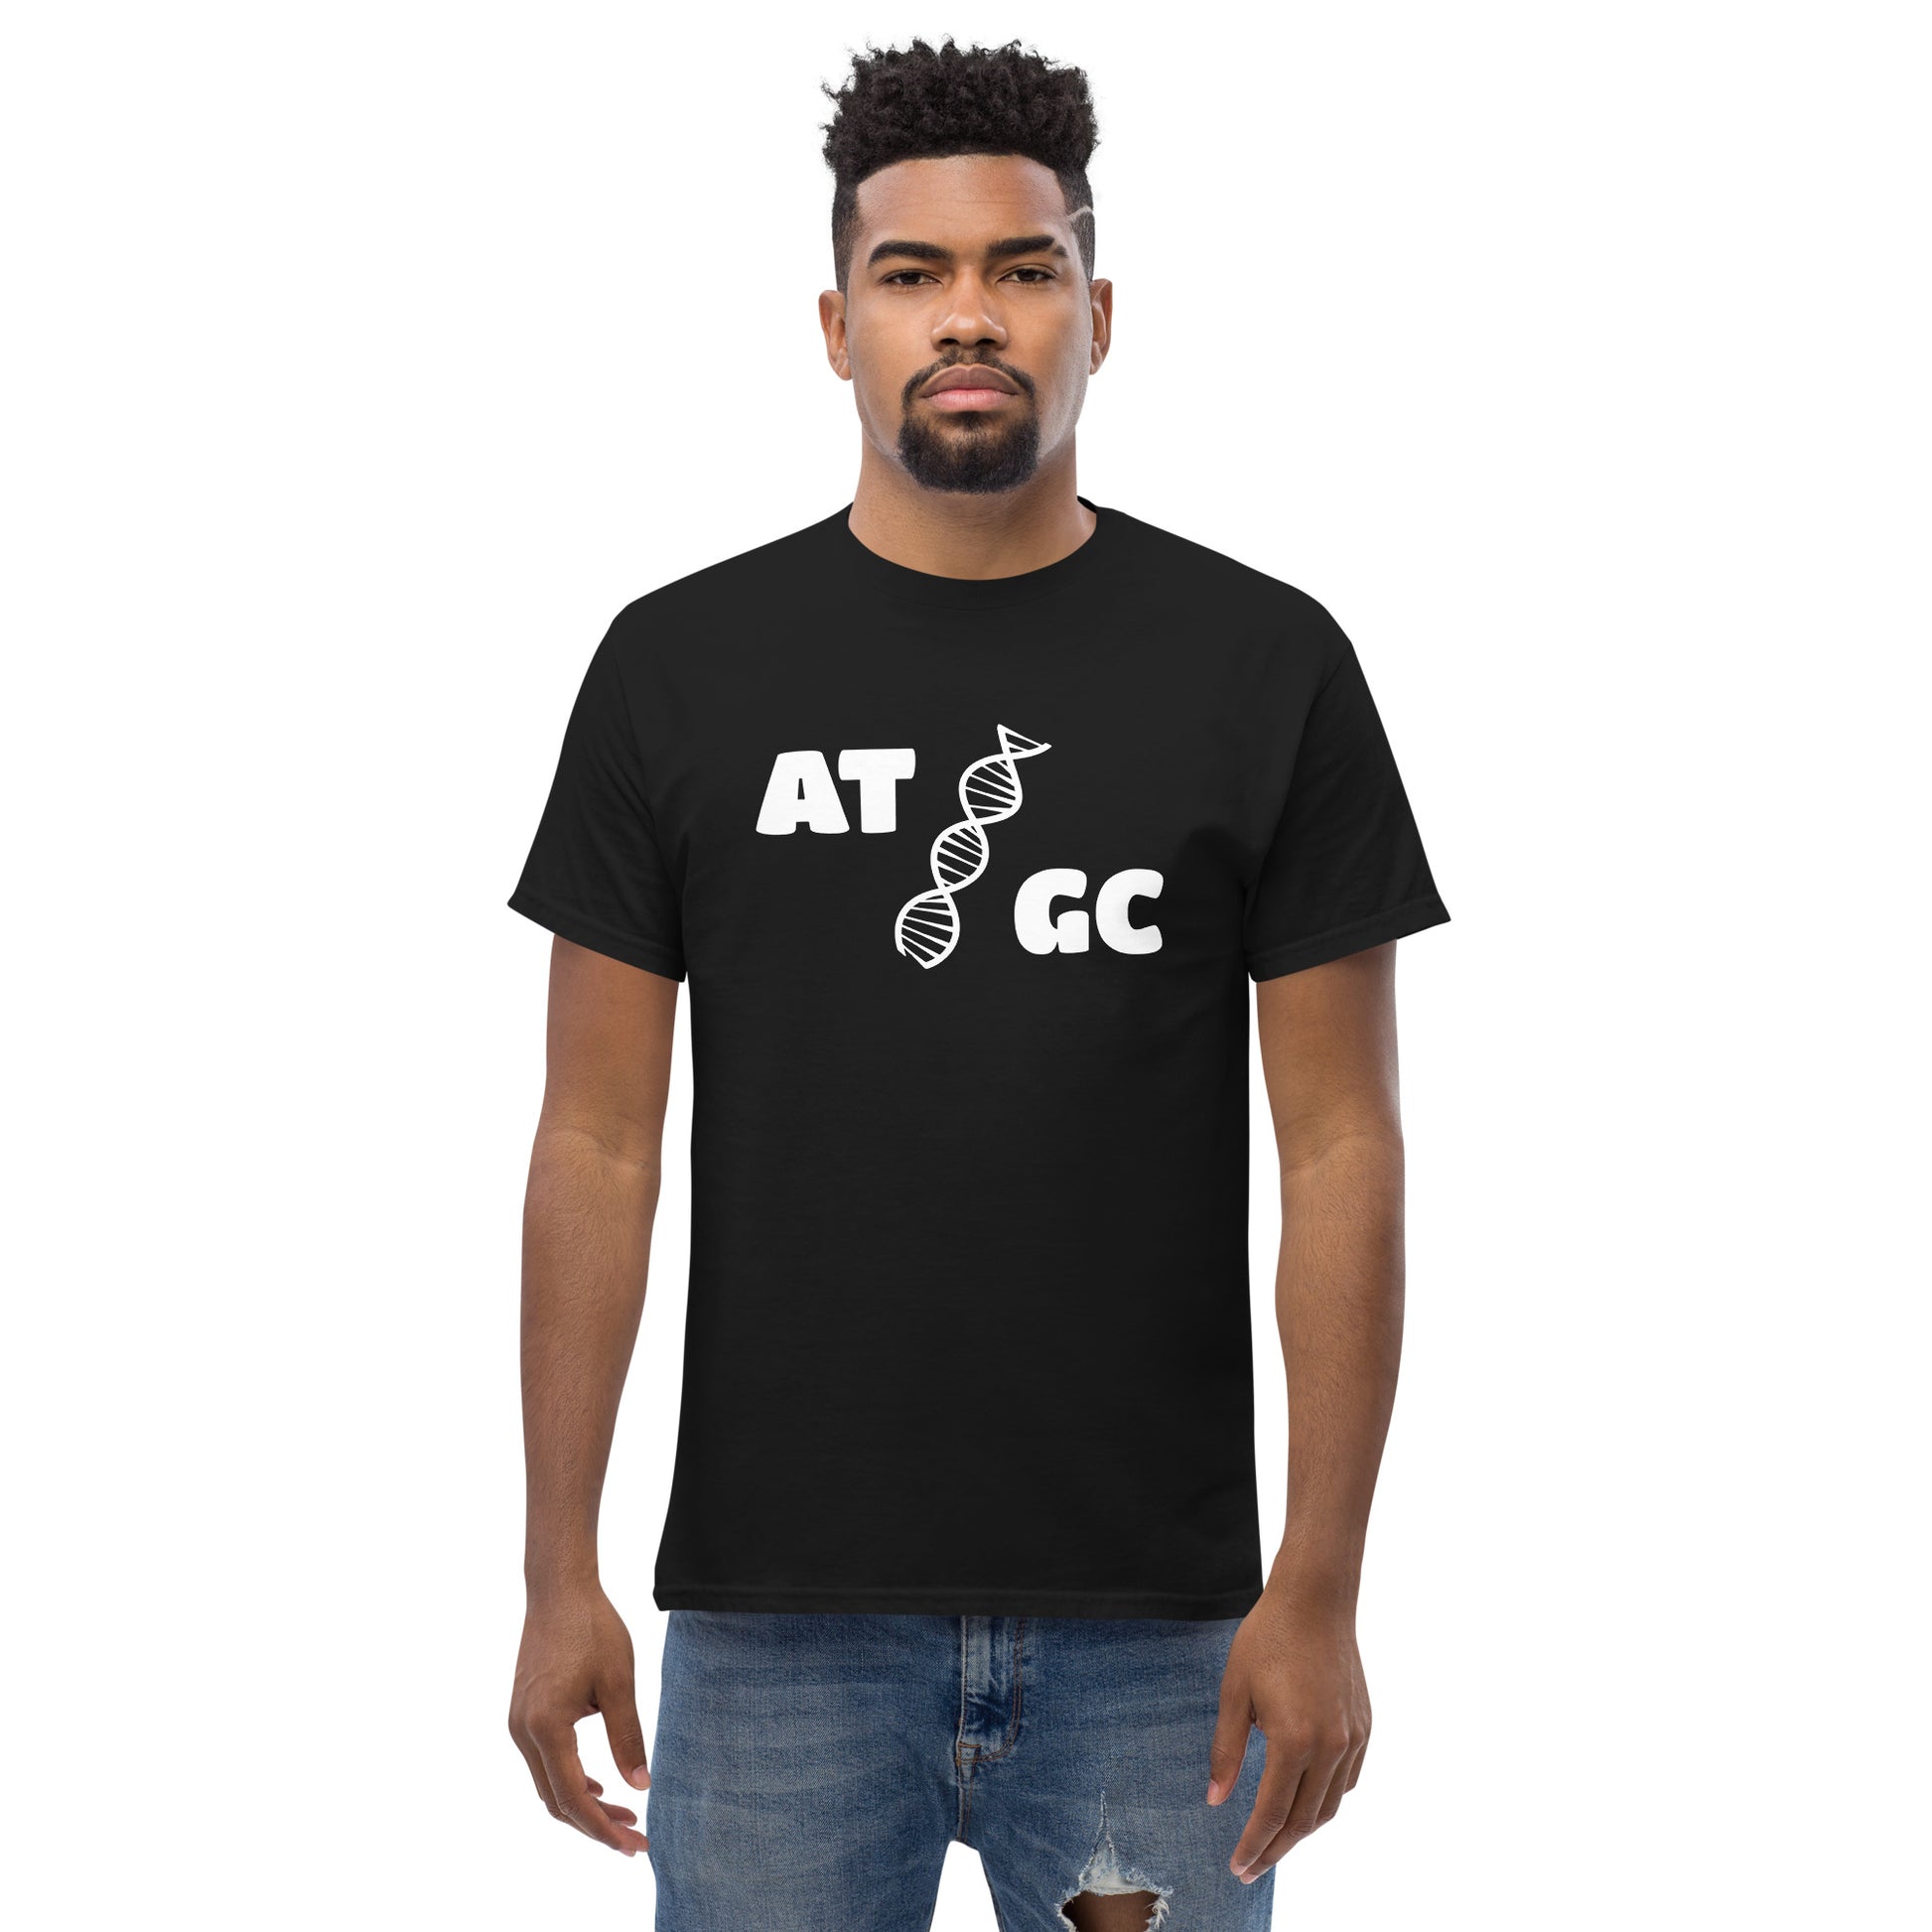 Men with black t-shirt with image of a DNA string and the text "ATGC"